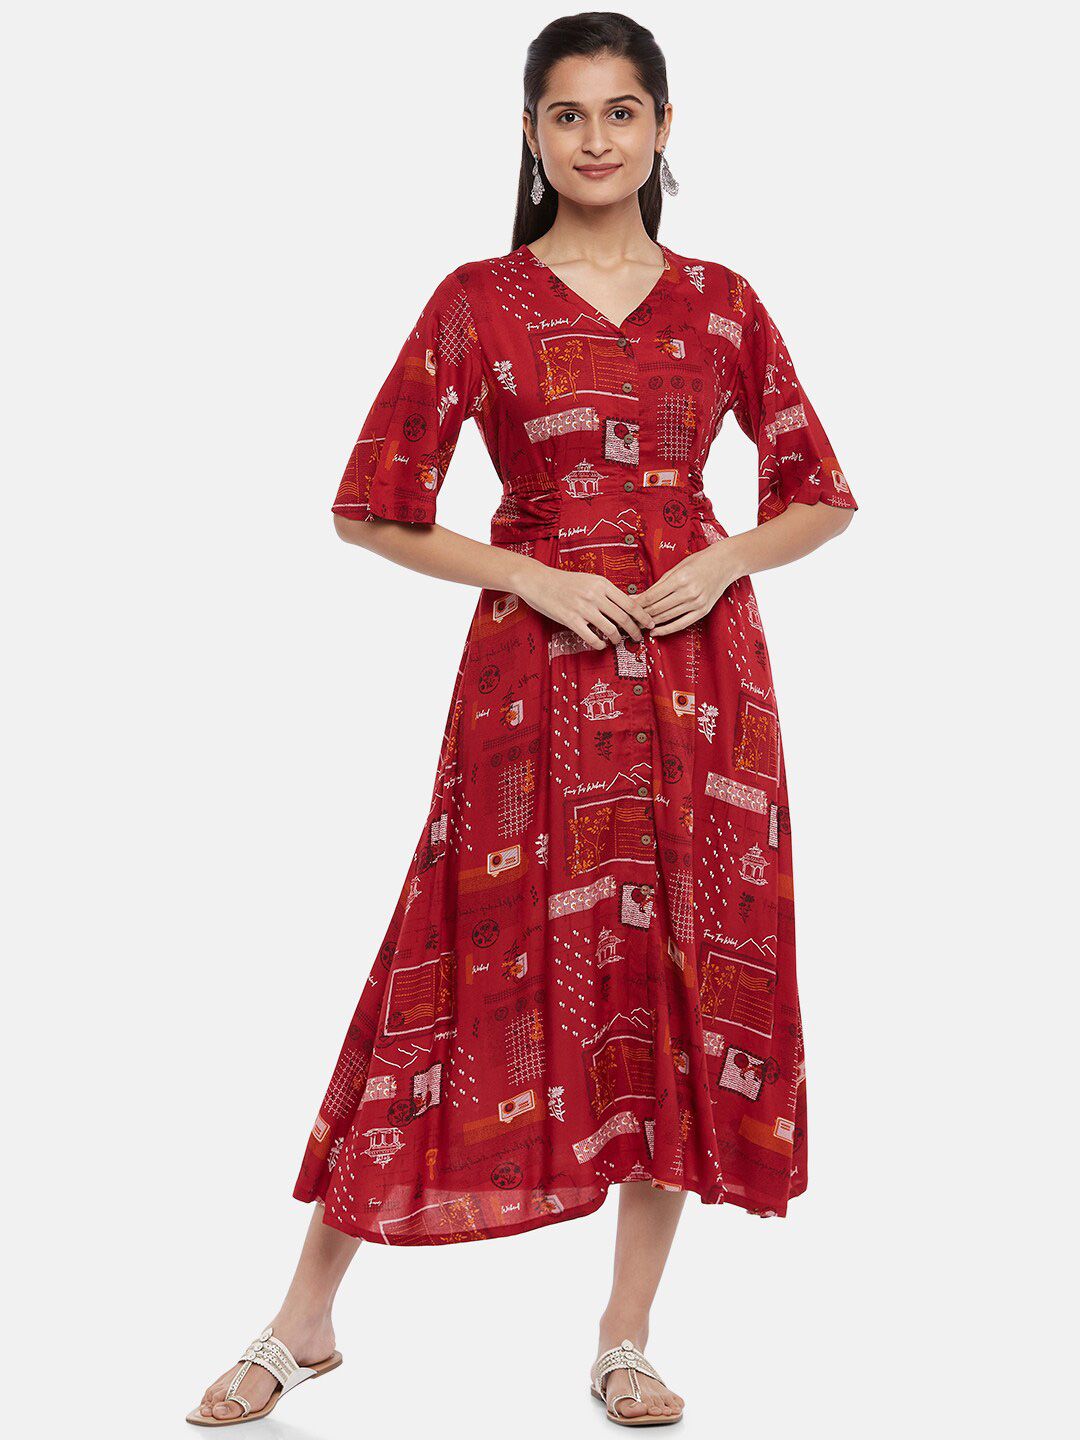 AKKRITI BY PANTALOONS Rust & White Floral Midi Dress Price in India